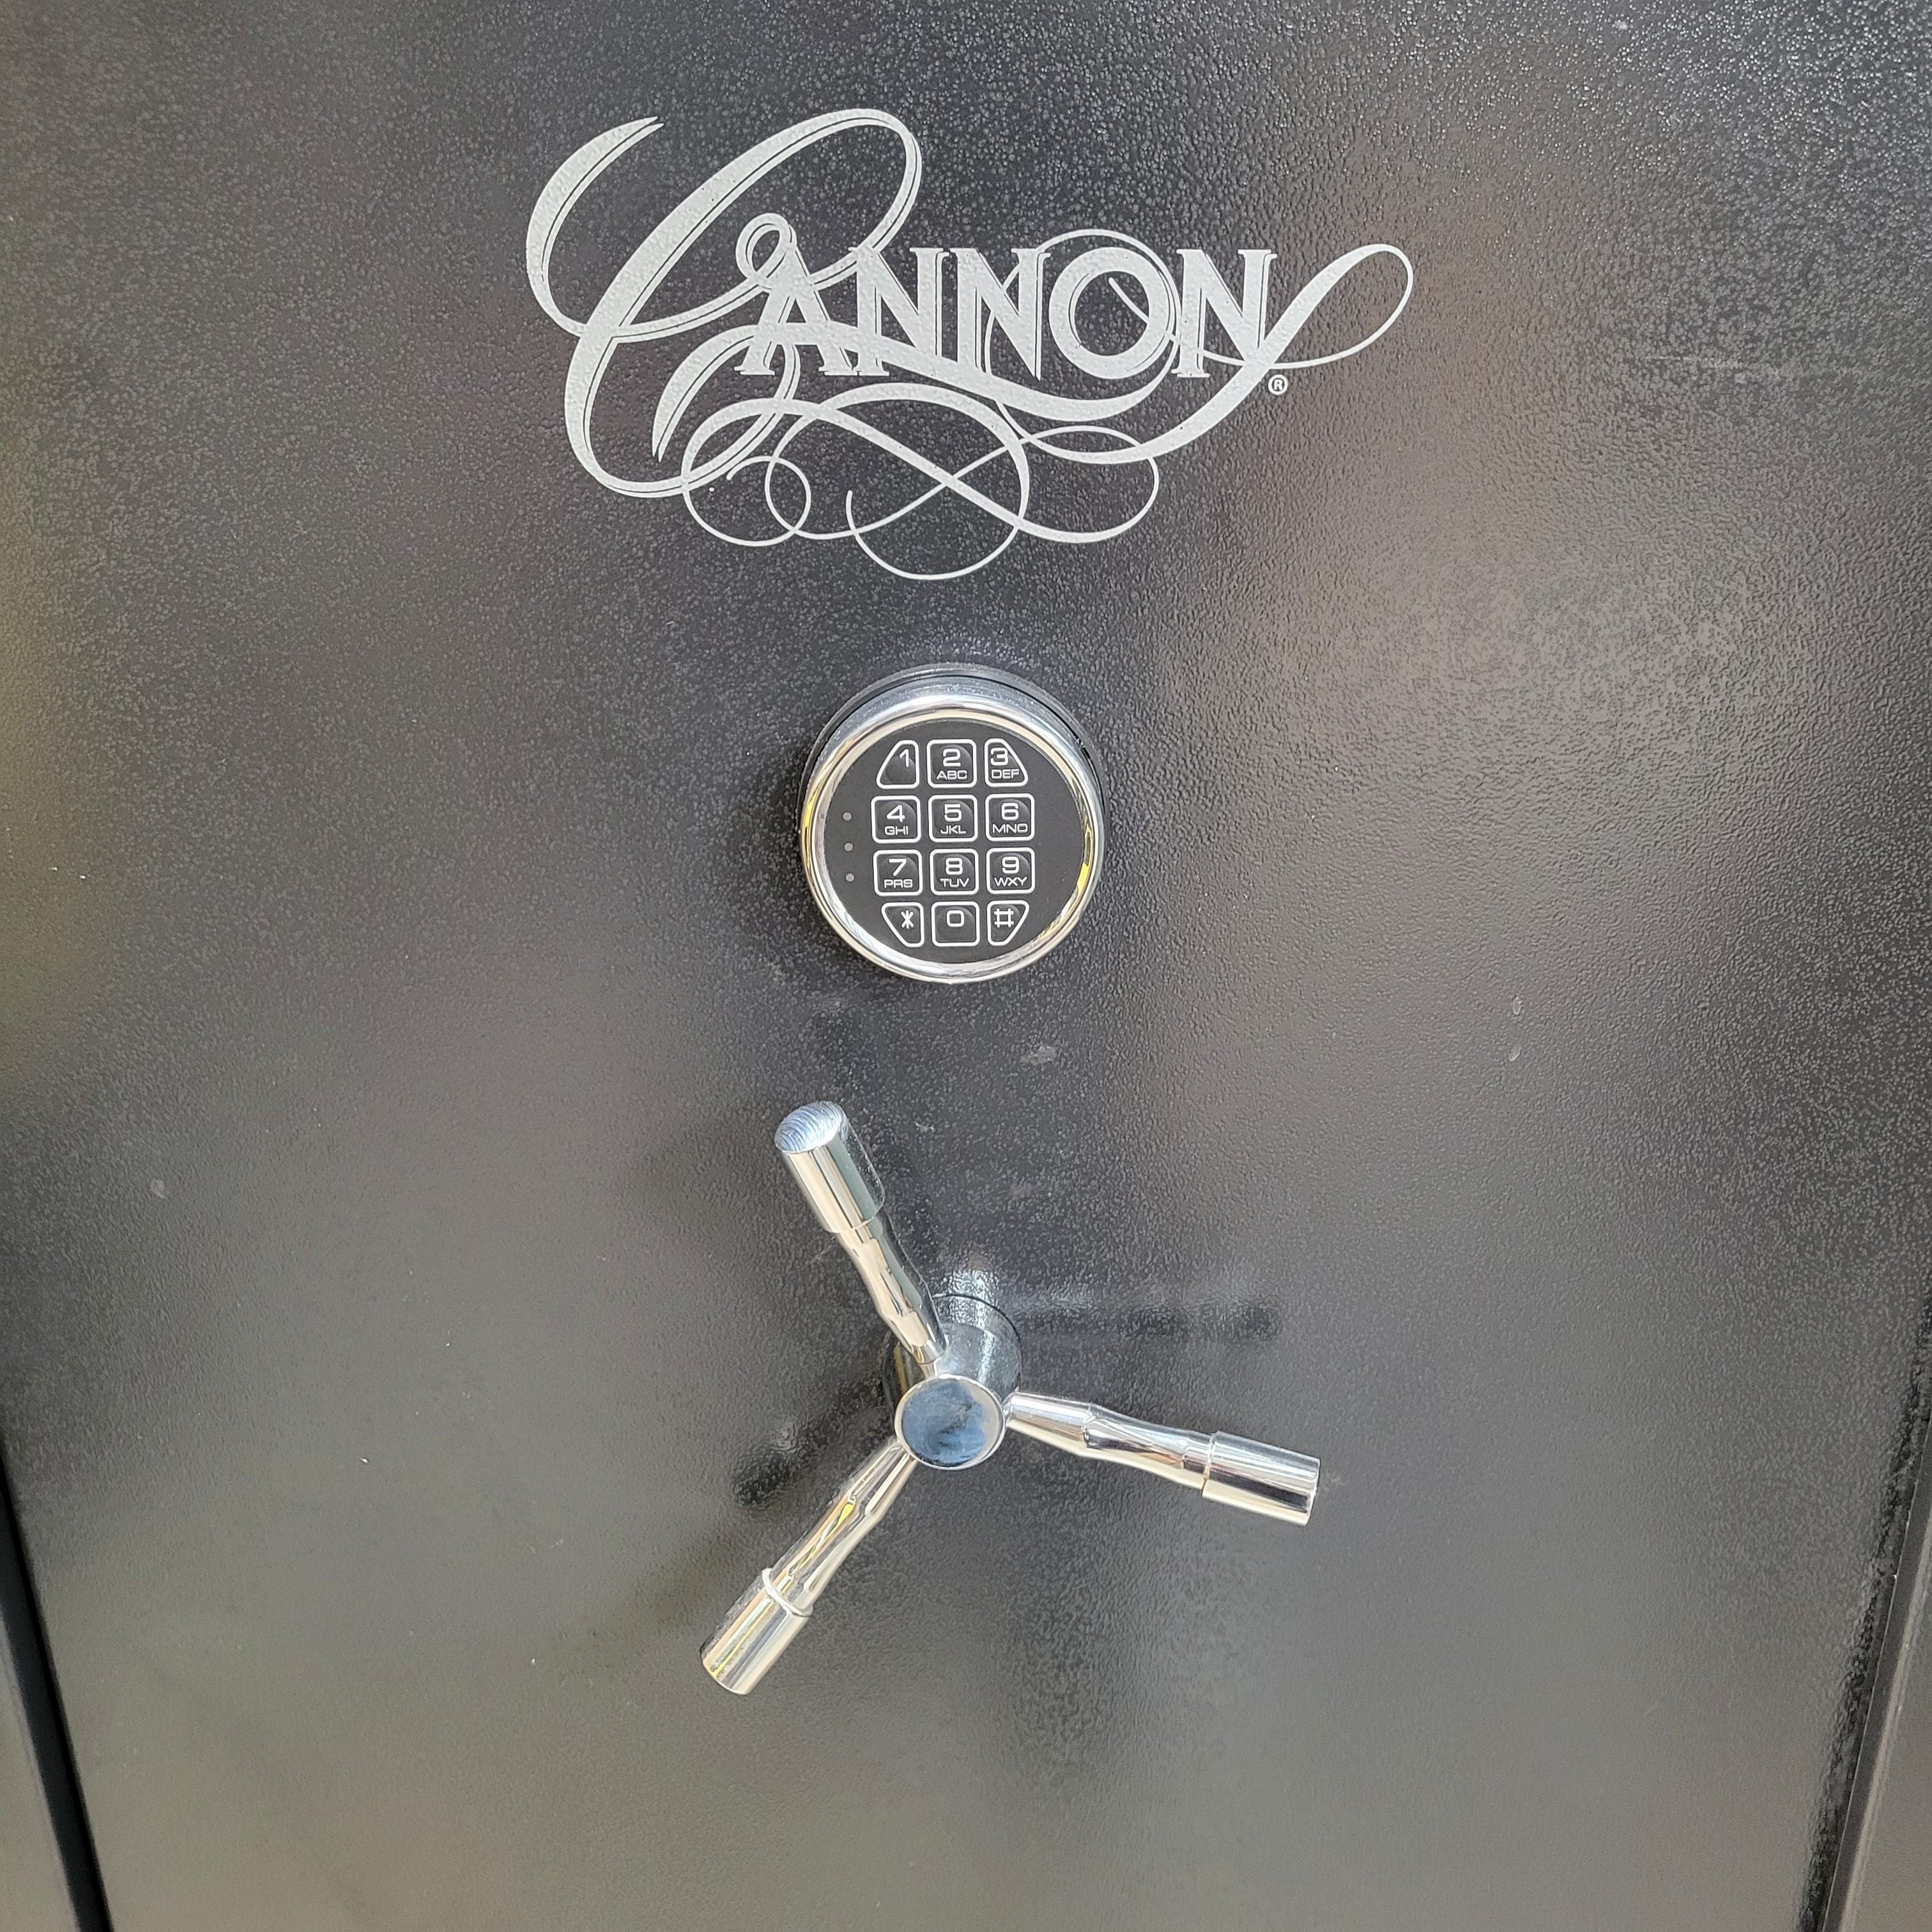 Used Cannon TS5735 Gun Safe, image 2 